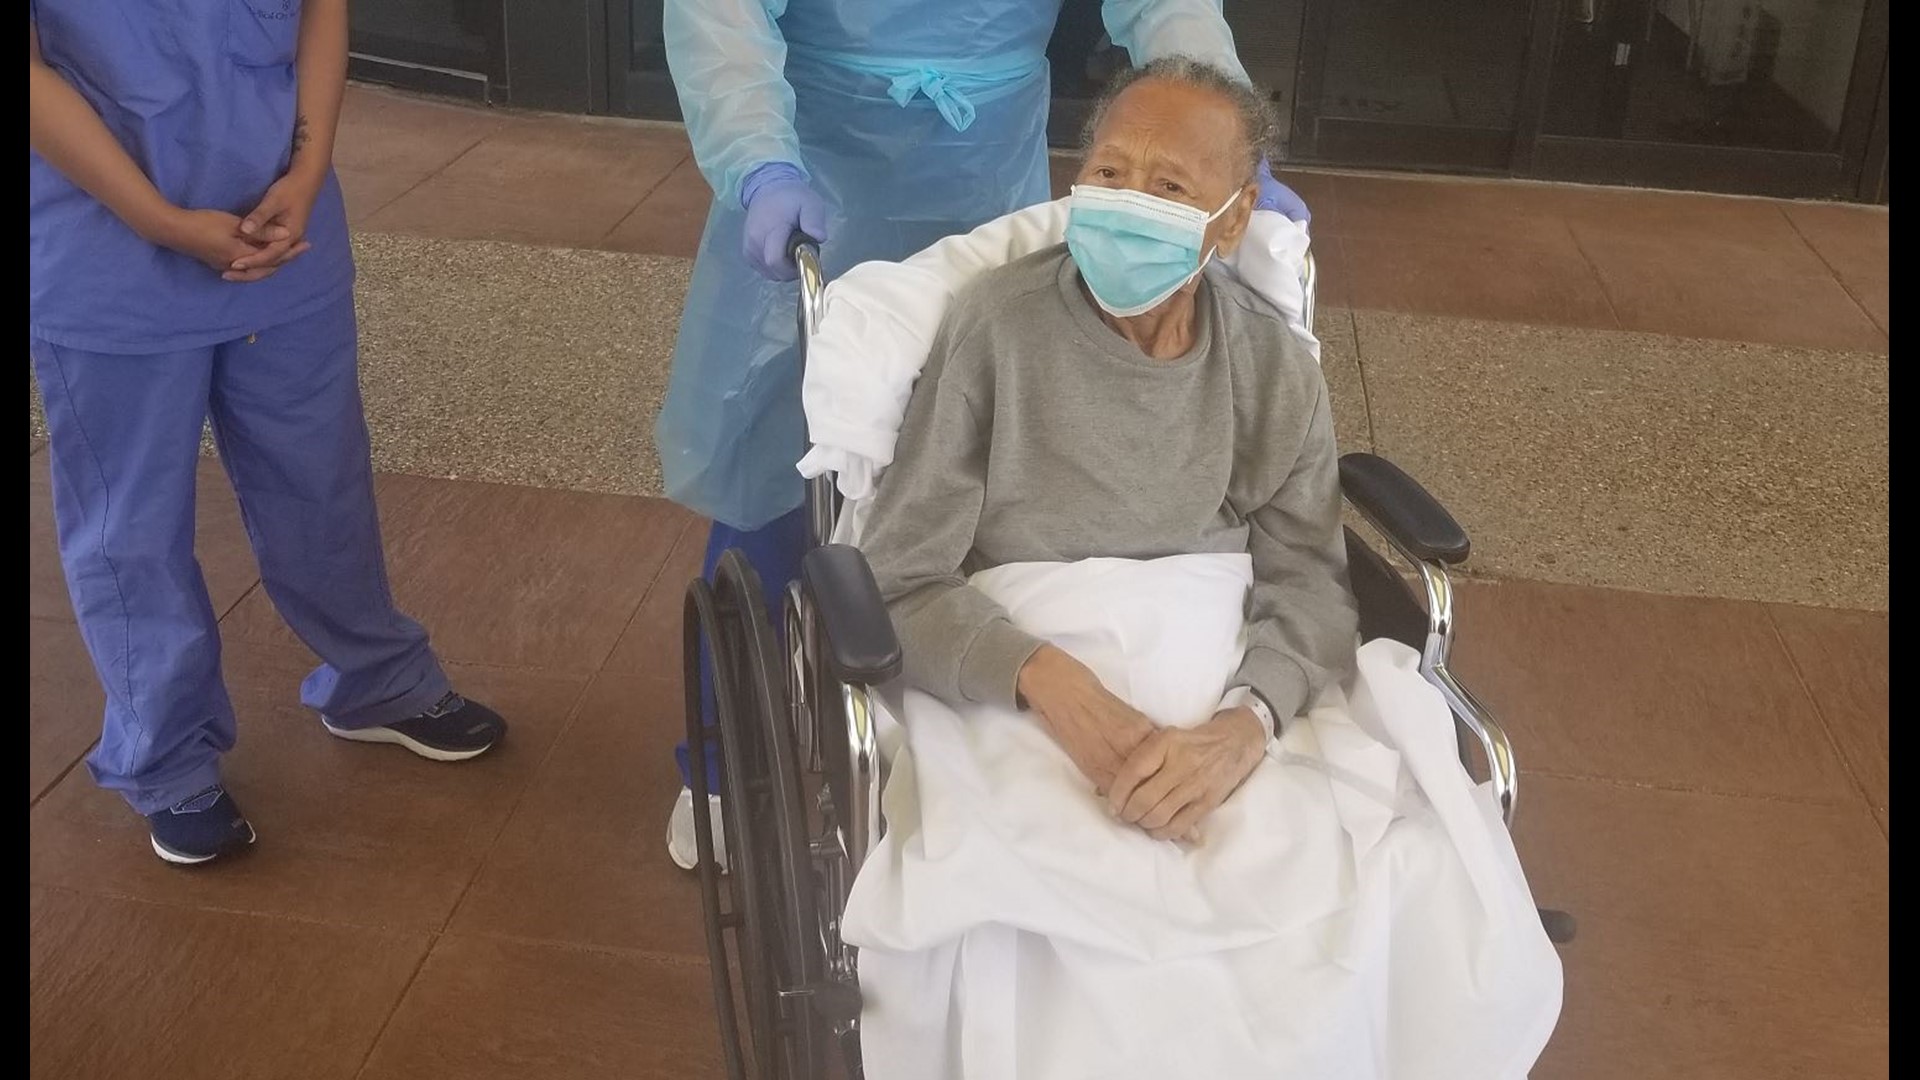 After two weeks in the hospital with COVID-19, 88-year-old Marie Smith was discharged. Six others in her family are also recovering from coronavirus.